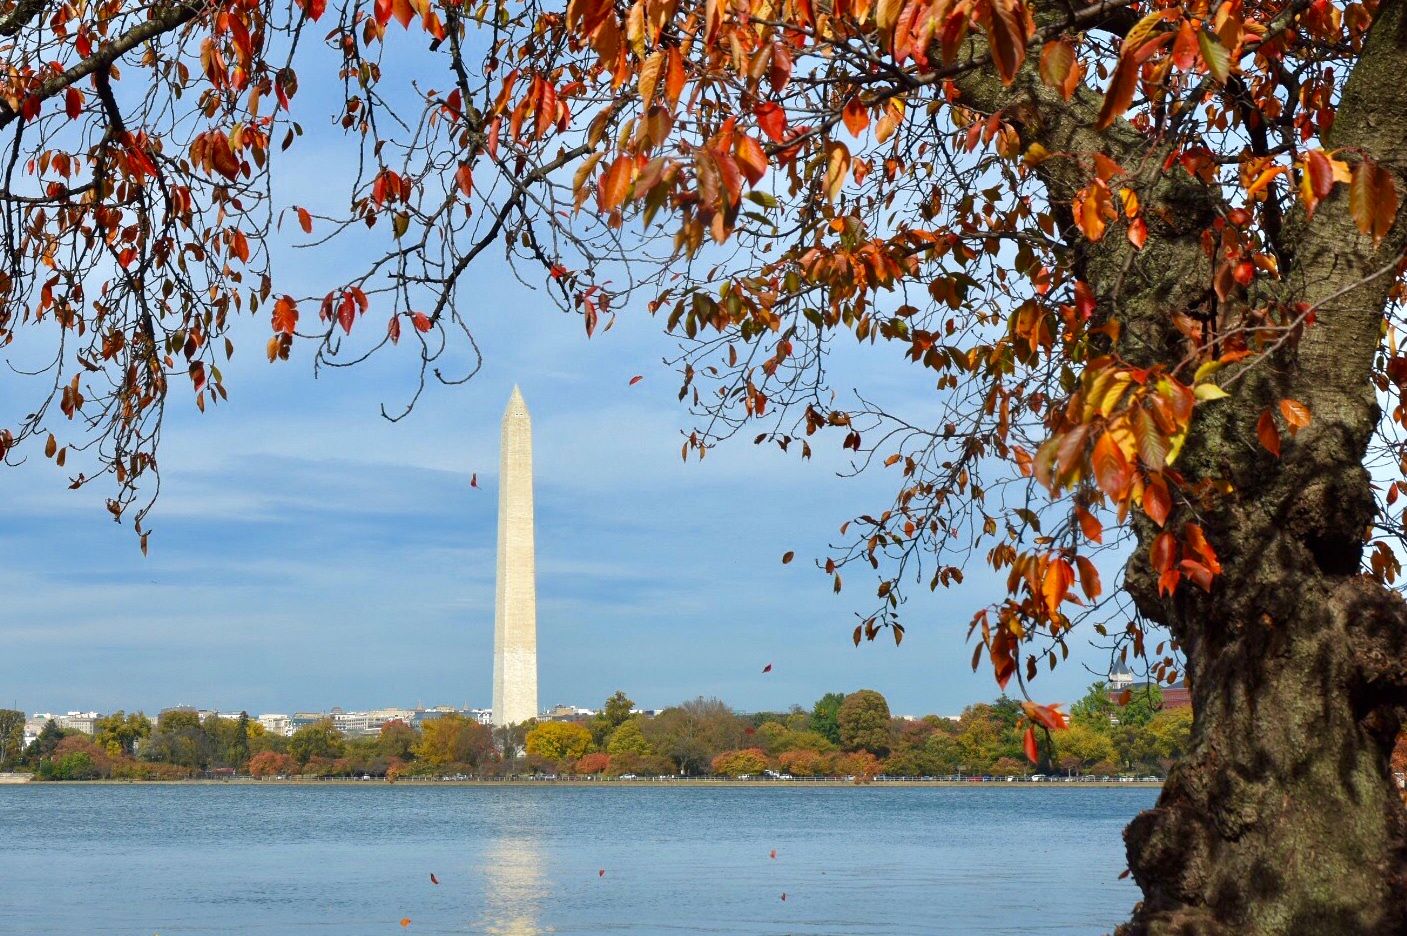 The outer rim of the Tidal Basin is lined with patches of bright yellow and oranges. (WTOP/Dave Dildine)